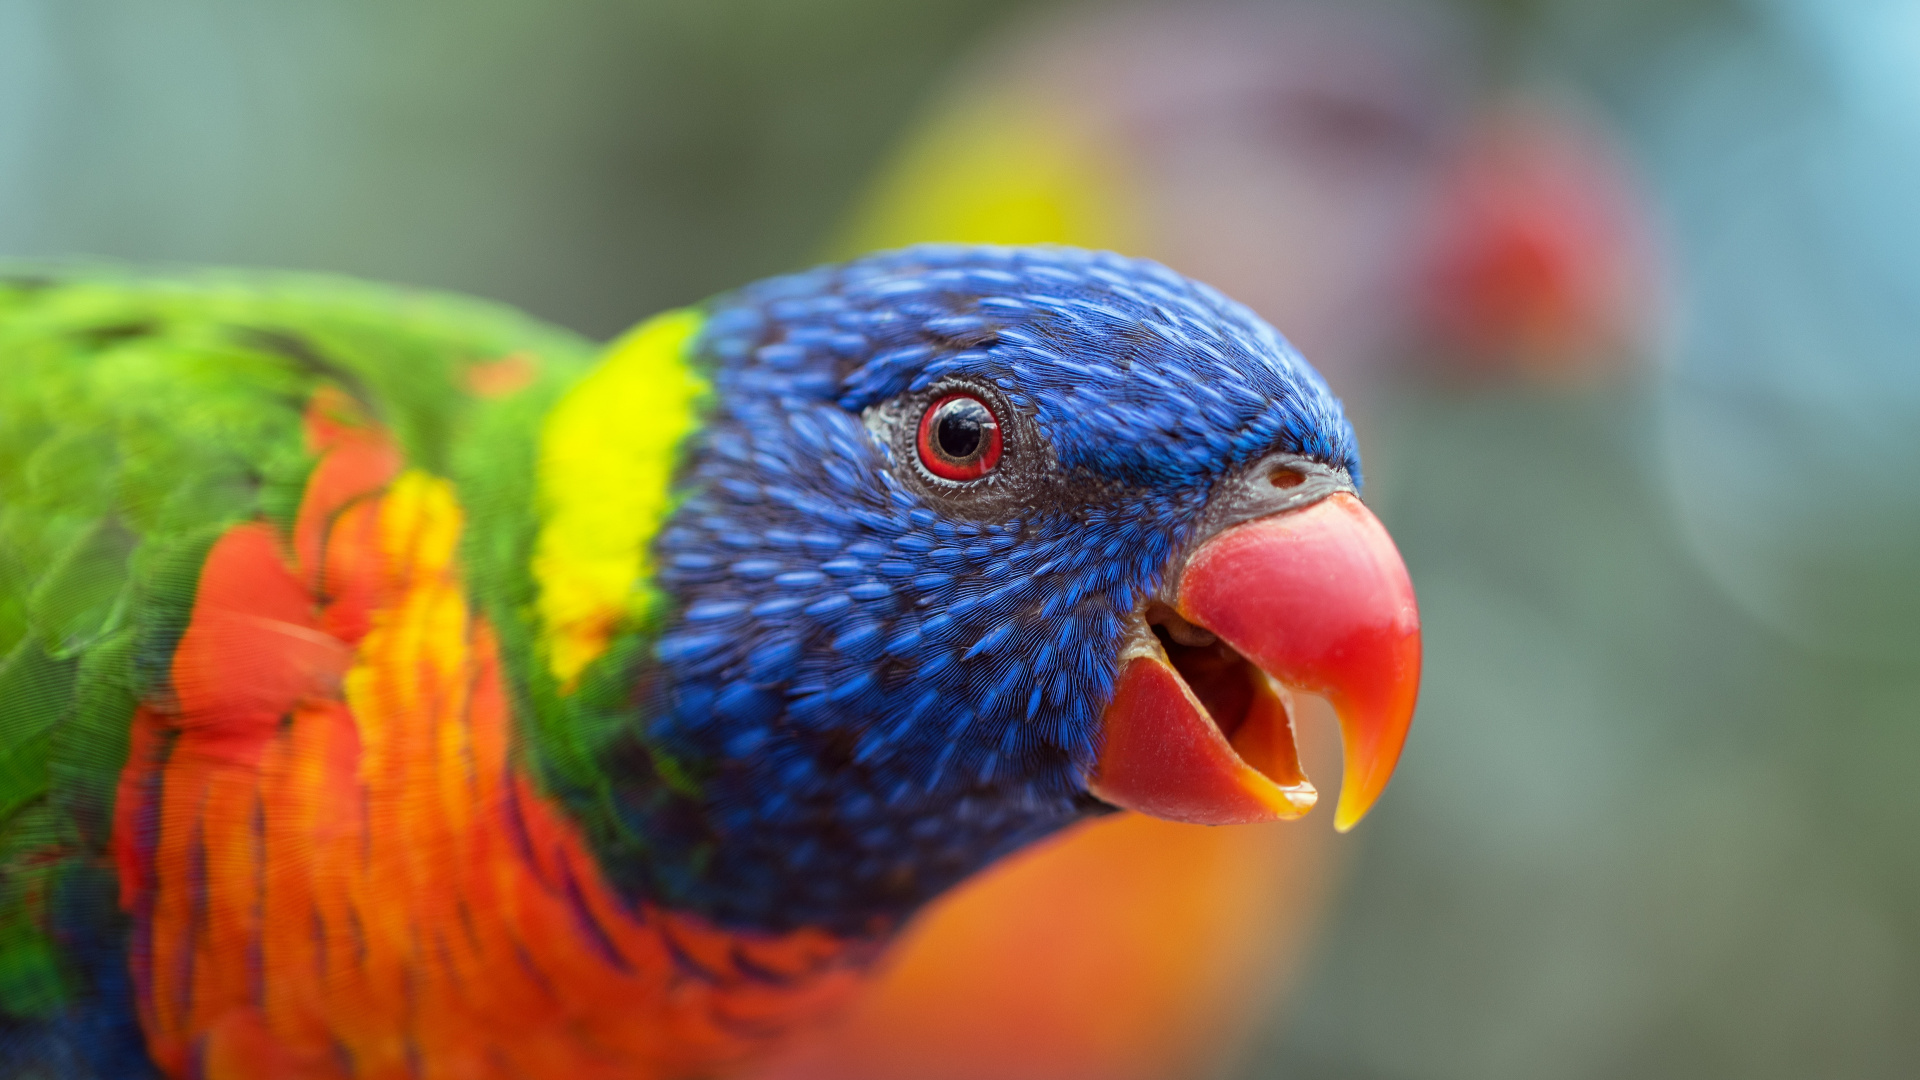 Blue Yellow and Red Bird. Wallpaper in 1920x1080 Resolution